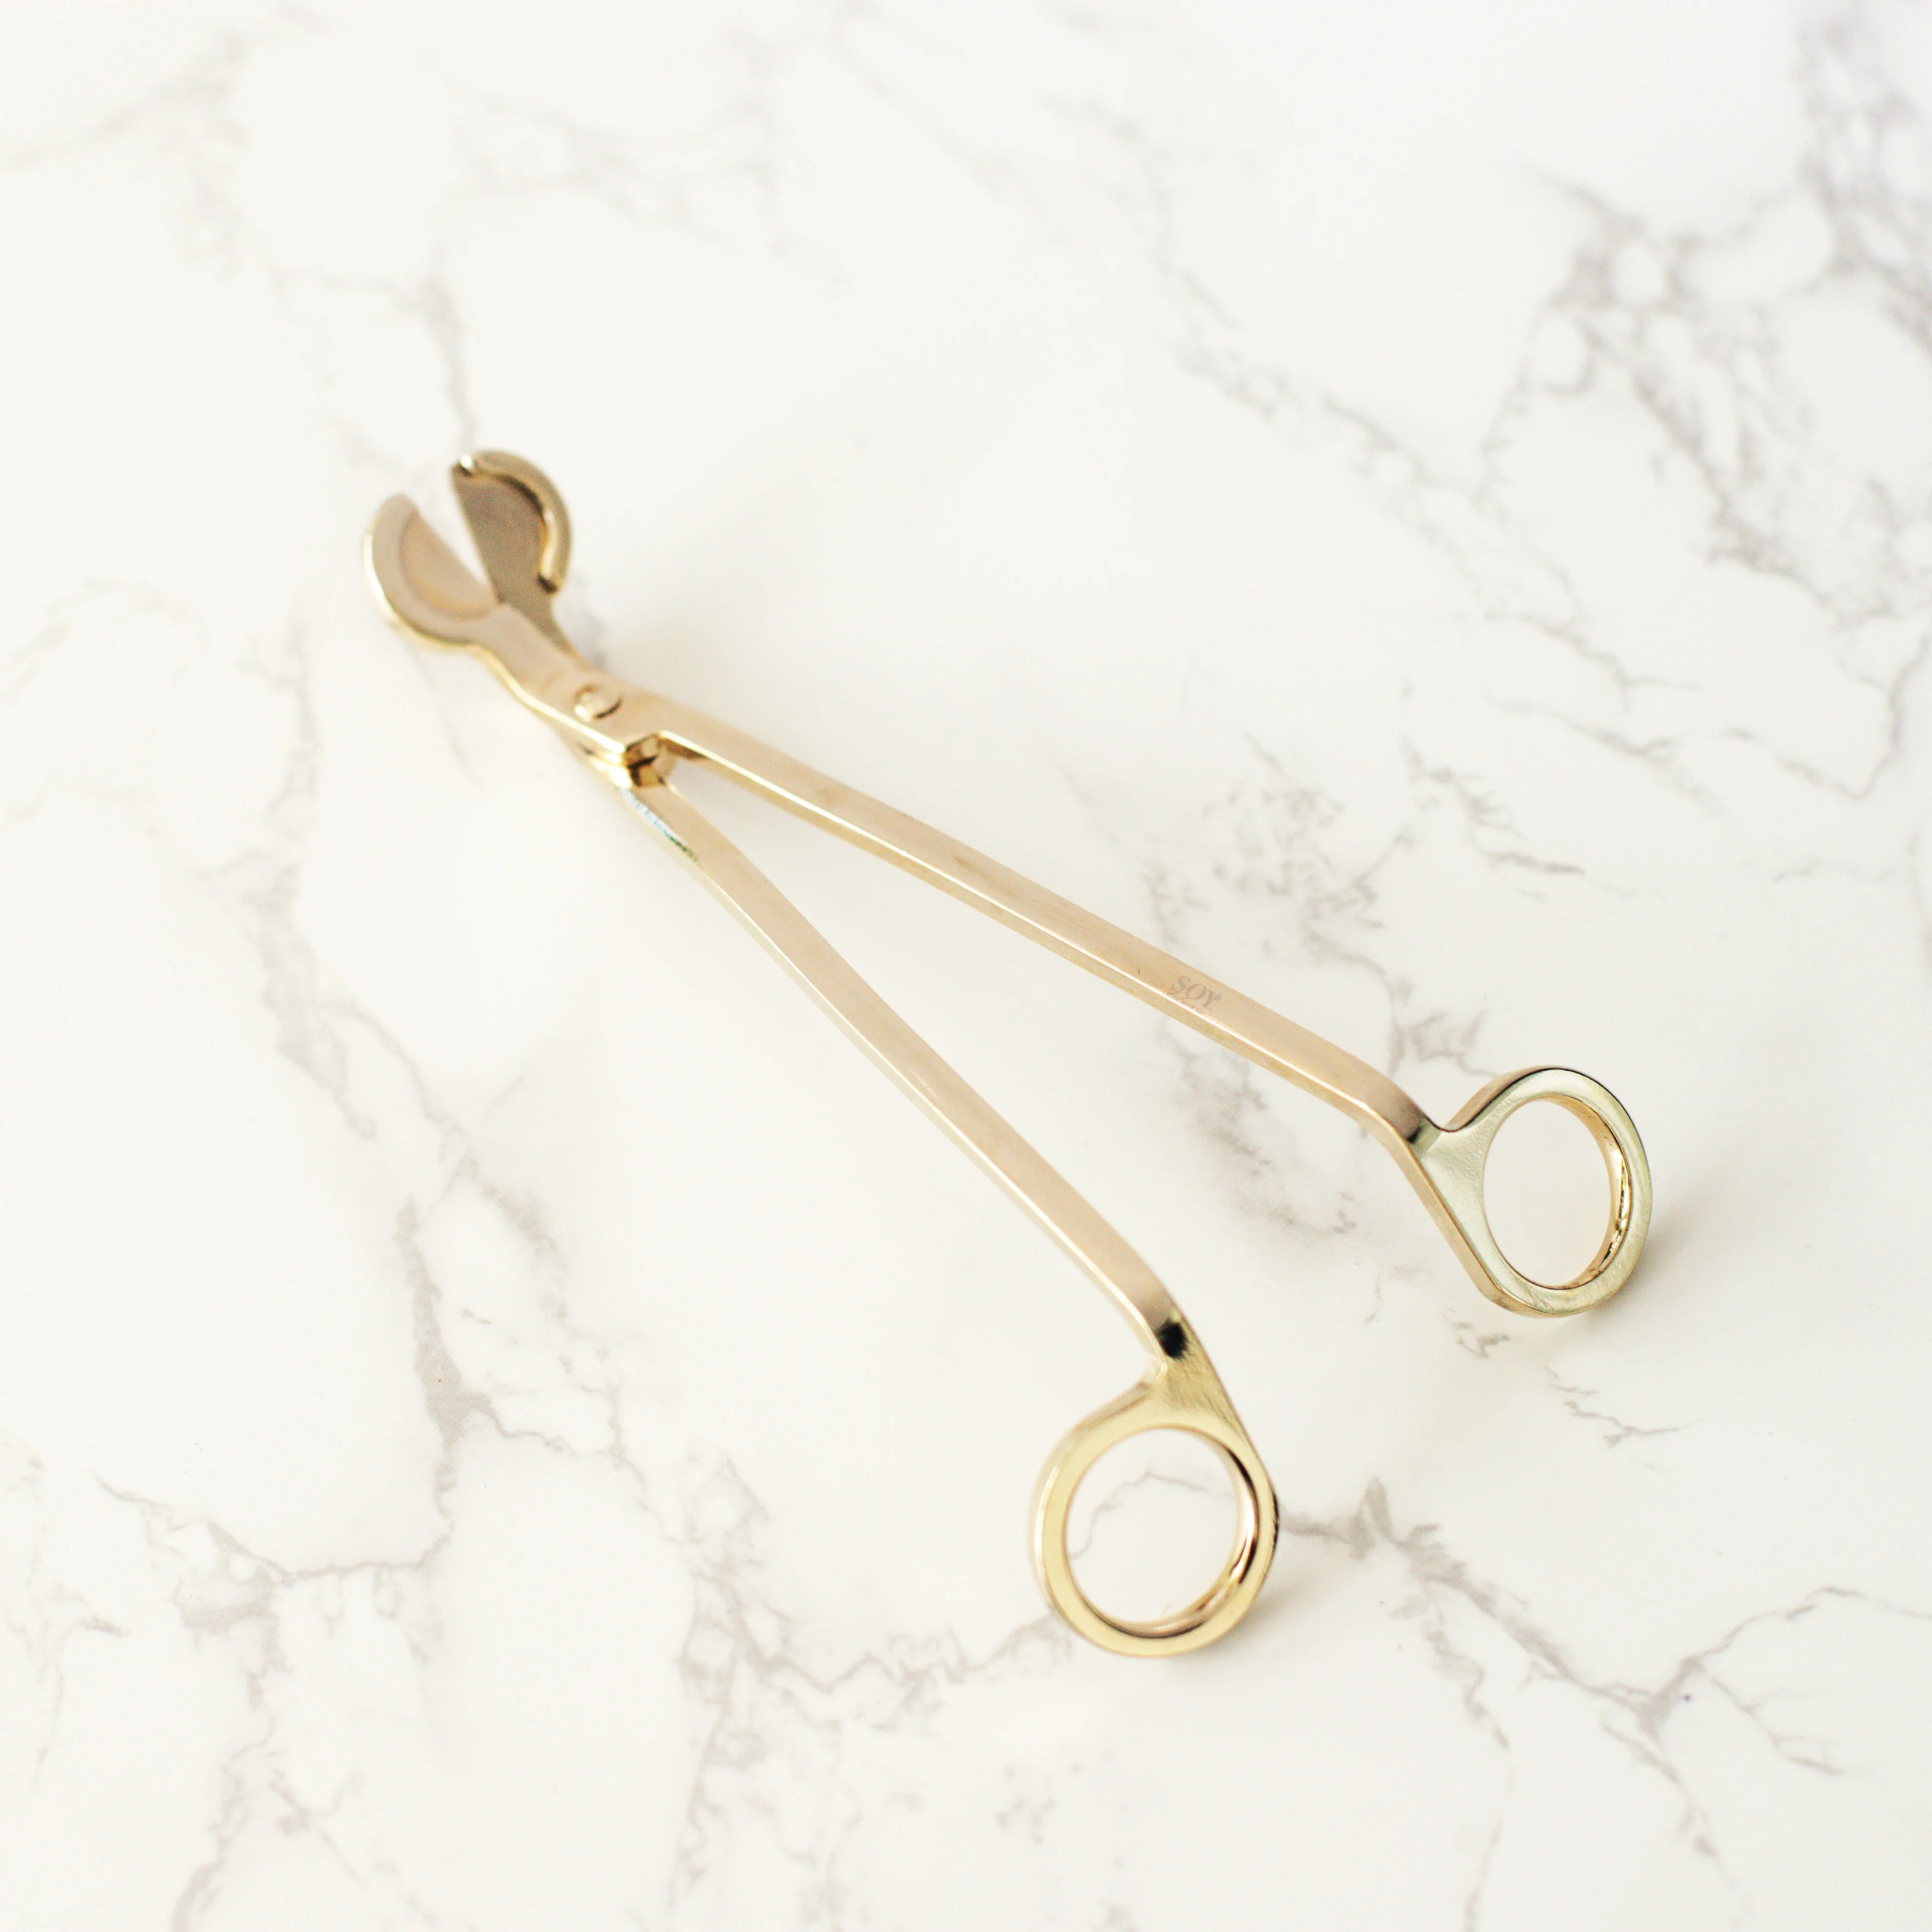 Soy Delicious - Wick Trimmer & Candle Snuffer